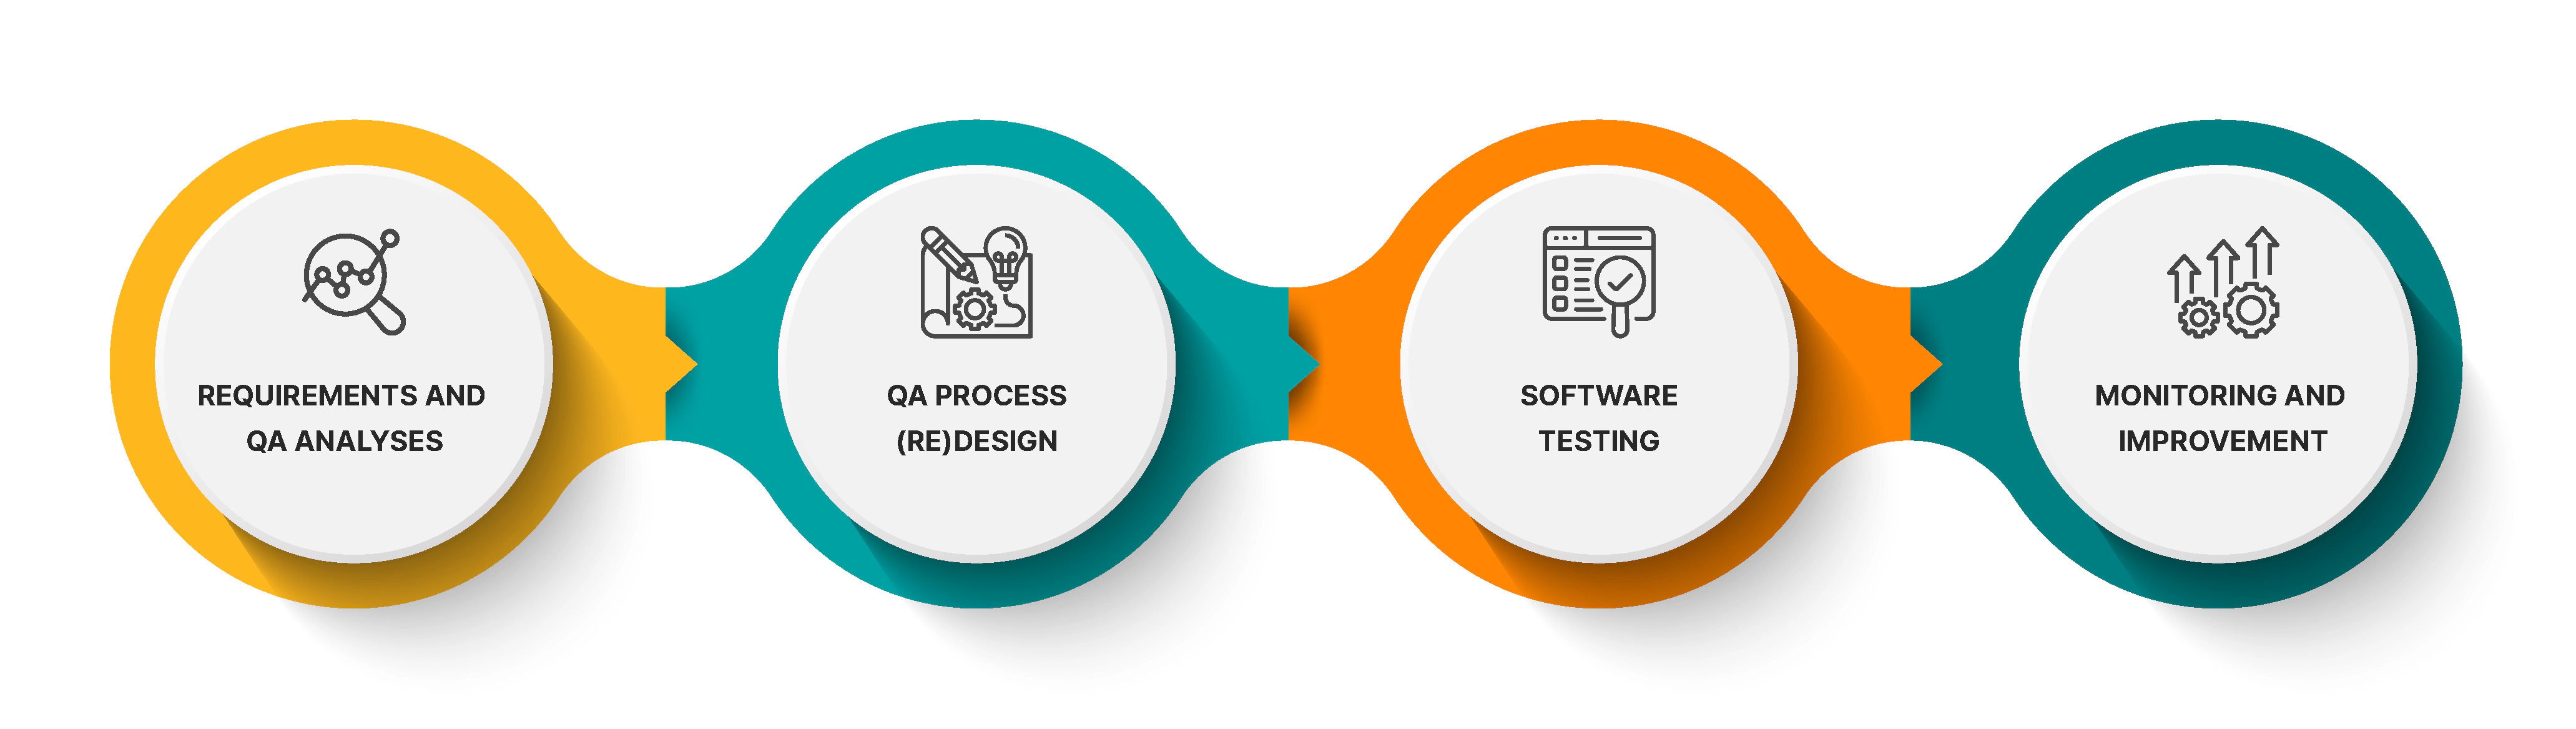 Progress diagram for steps to develop QA processes and procedures: 1. requirements and QA analyses; 2. QA process (re)design; software testing; monitoring and improvement.